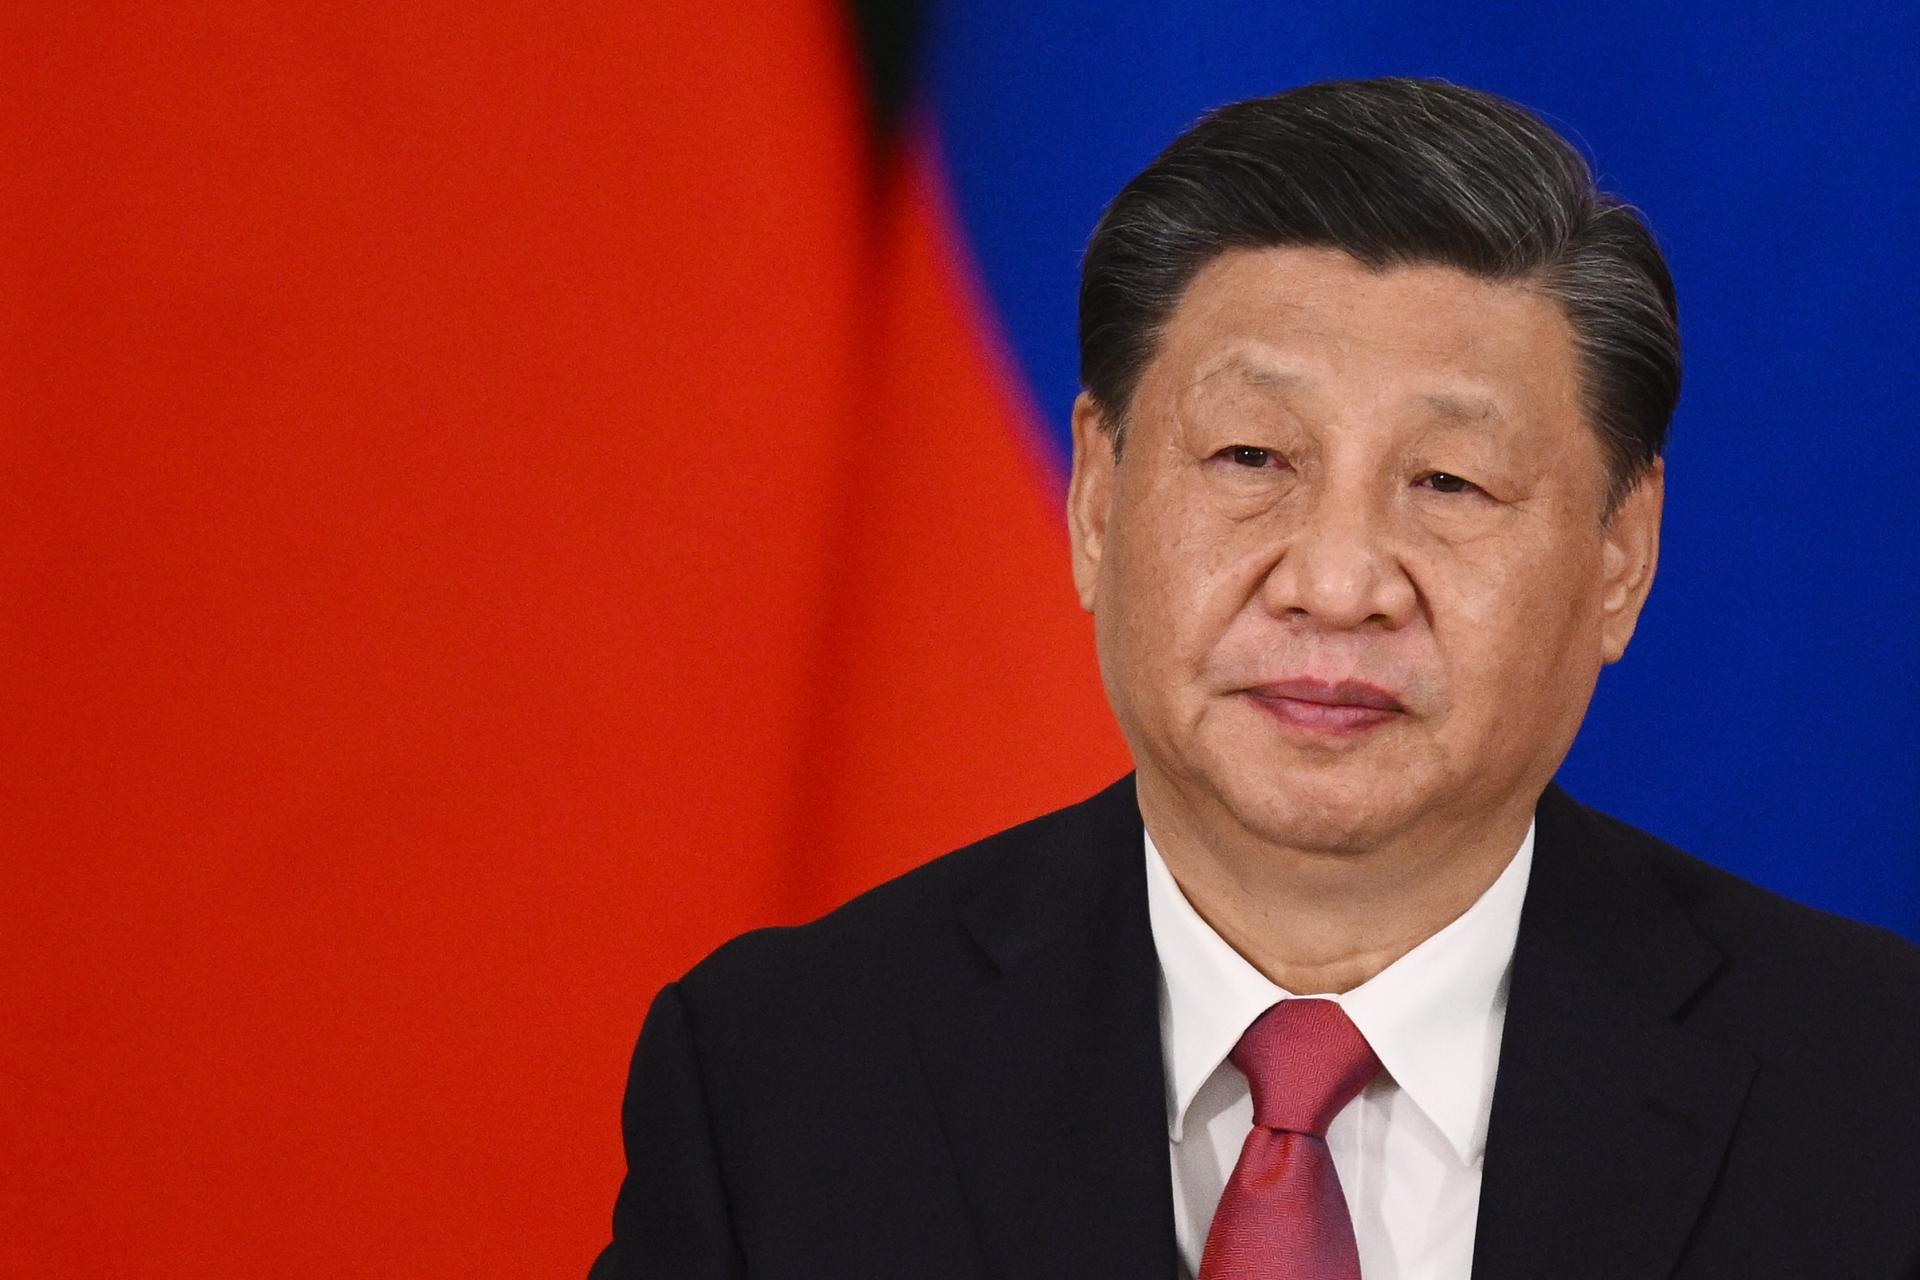 Chinese President Xi Jinping attends the signing ceremony of documents concerning the further development and cooperation between Russia and China at the Moscow Kremlin, Russia, 21 March 2023. EFE-EPA FILE/VLADIMIR ASTAPKOVICH / SPUTNIK / KREMLIN POOL MANDATORY CREDIT